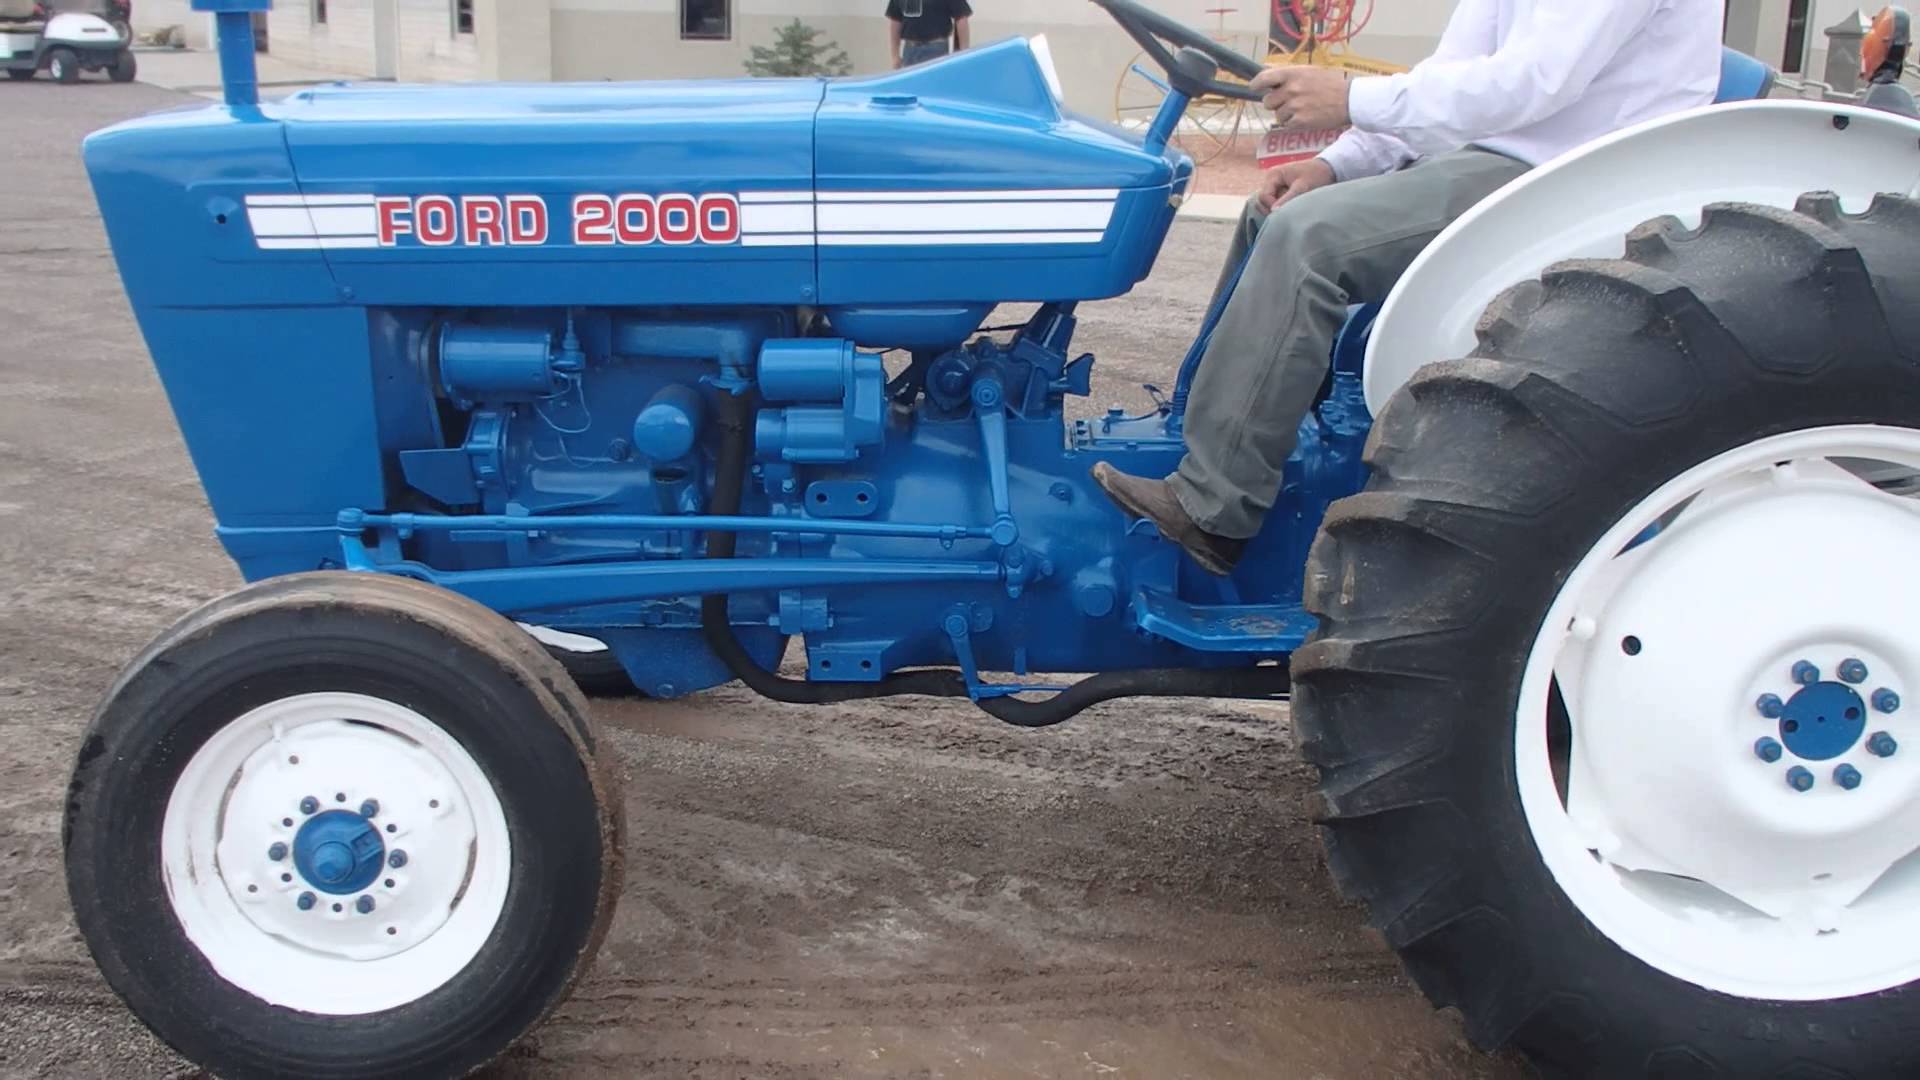 TRACTOR FORD 2000 - YouTube